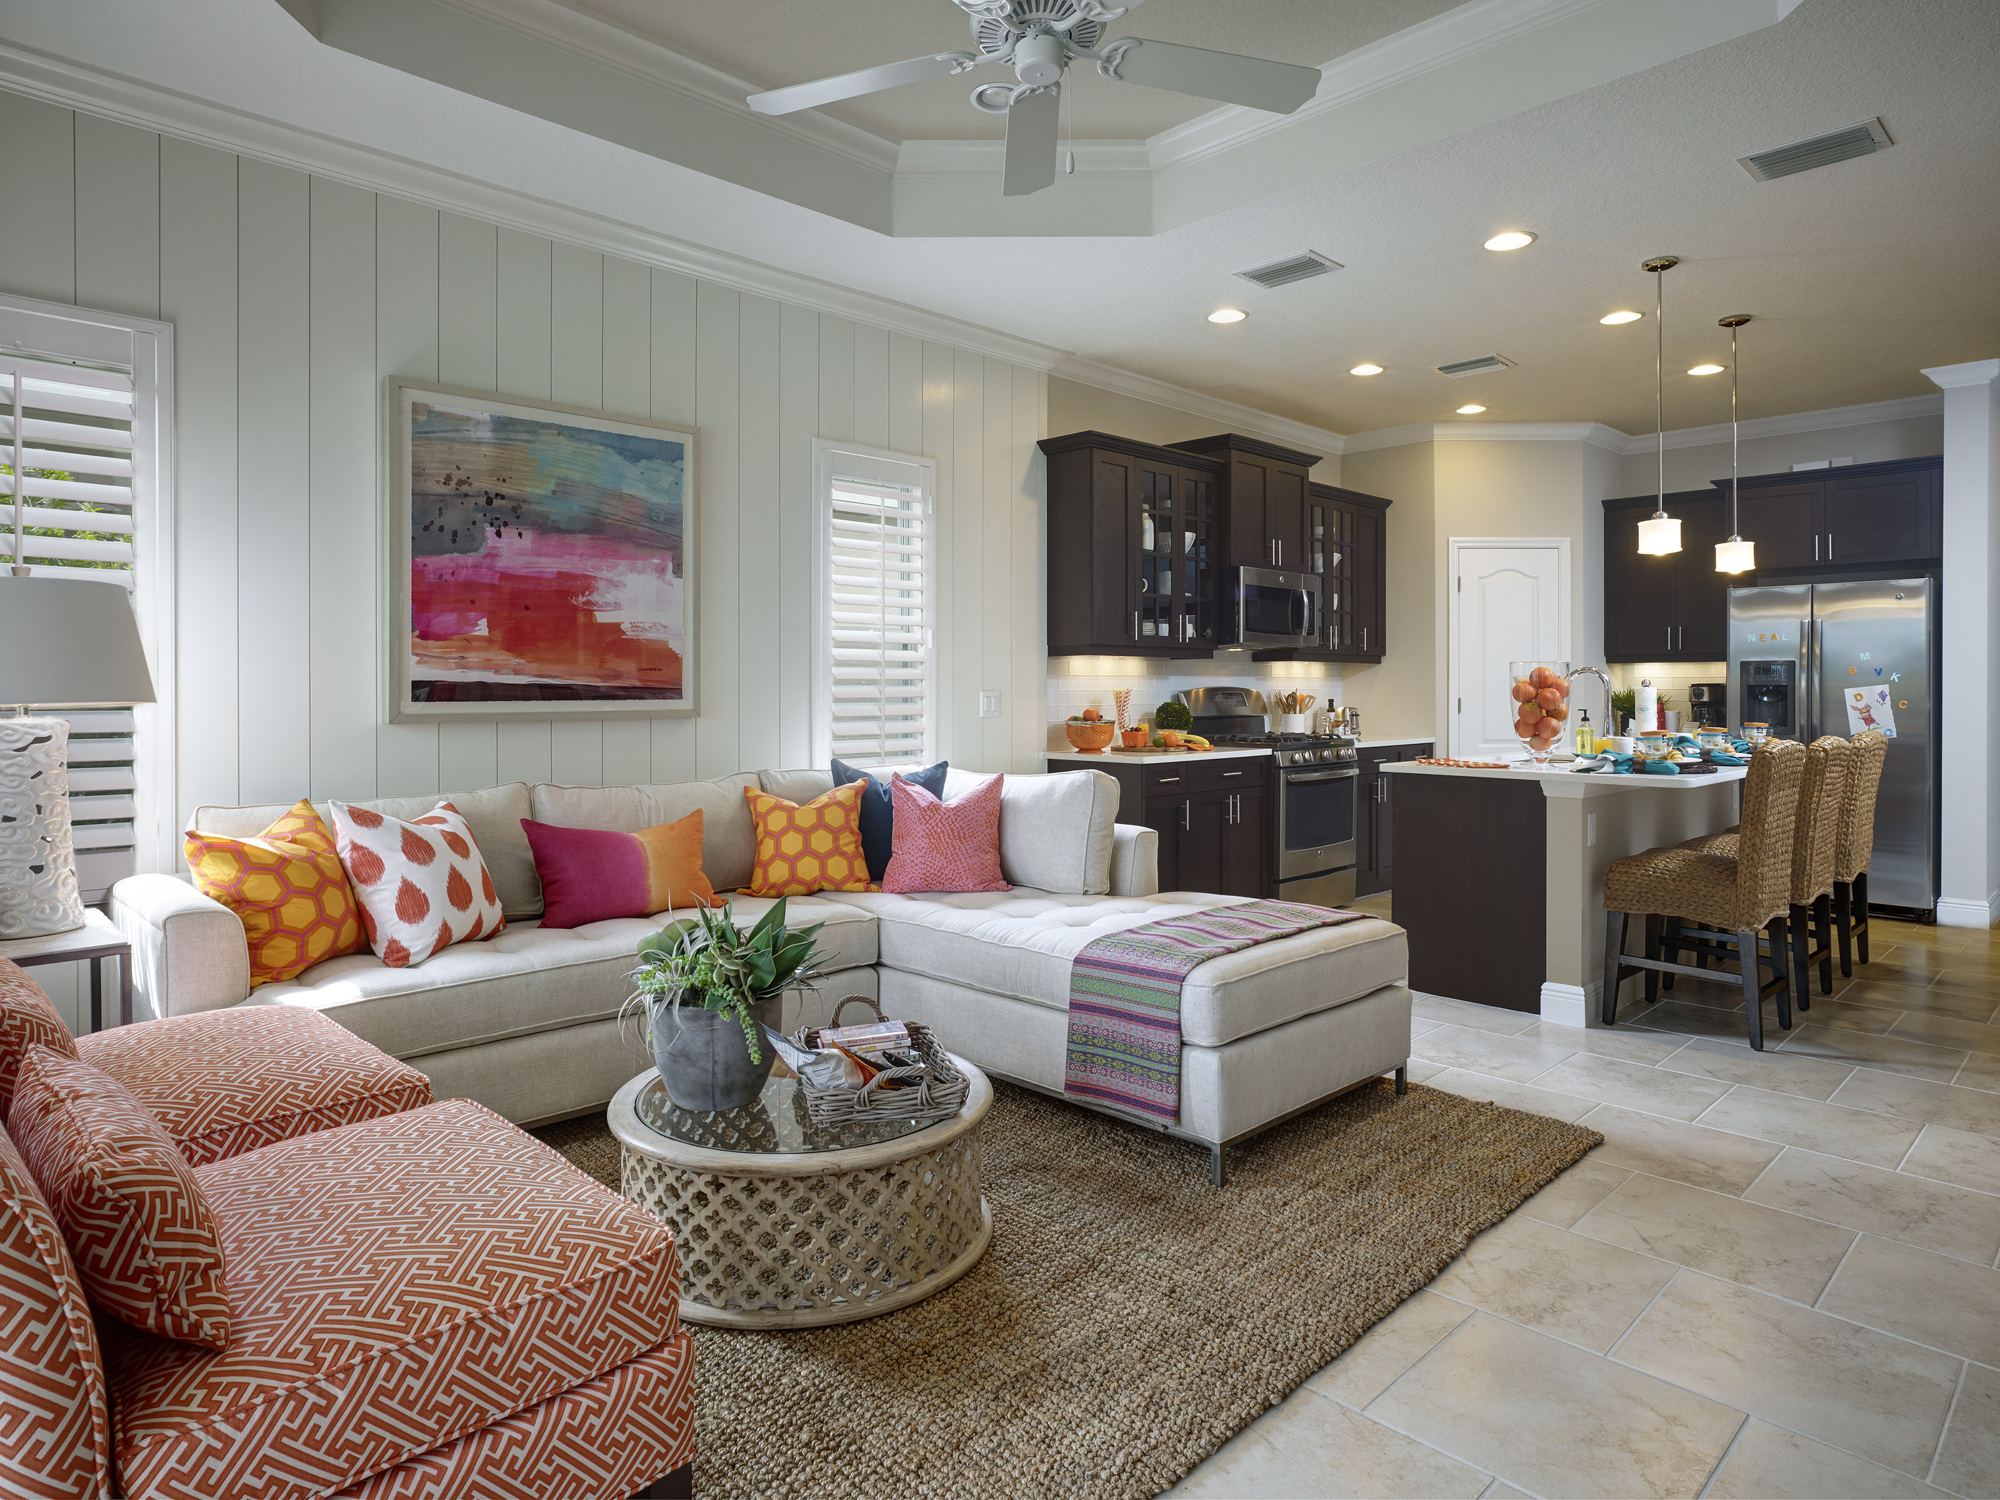 Neal Communities is showcasing its Victory model in its new Indigo community. Courtesy photo.